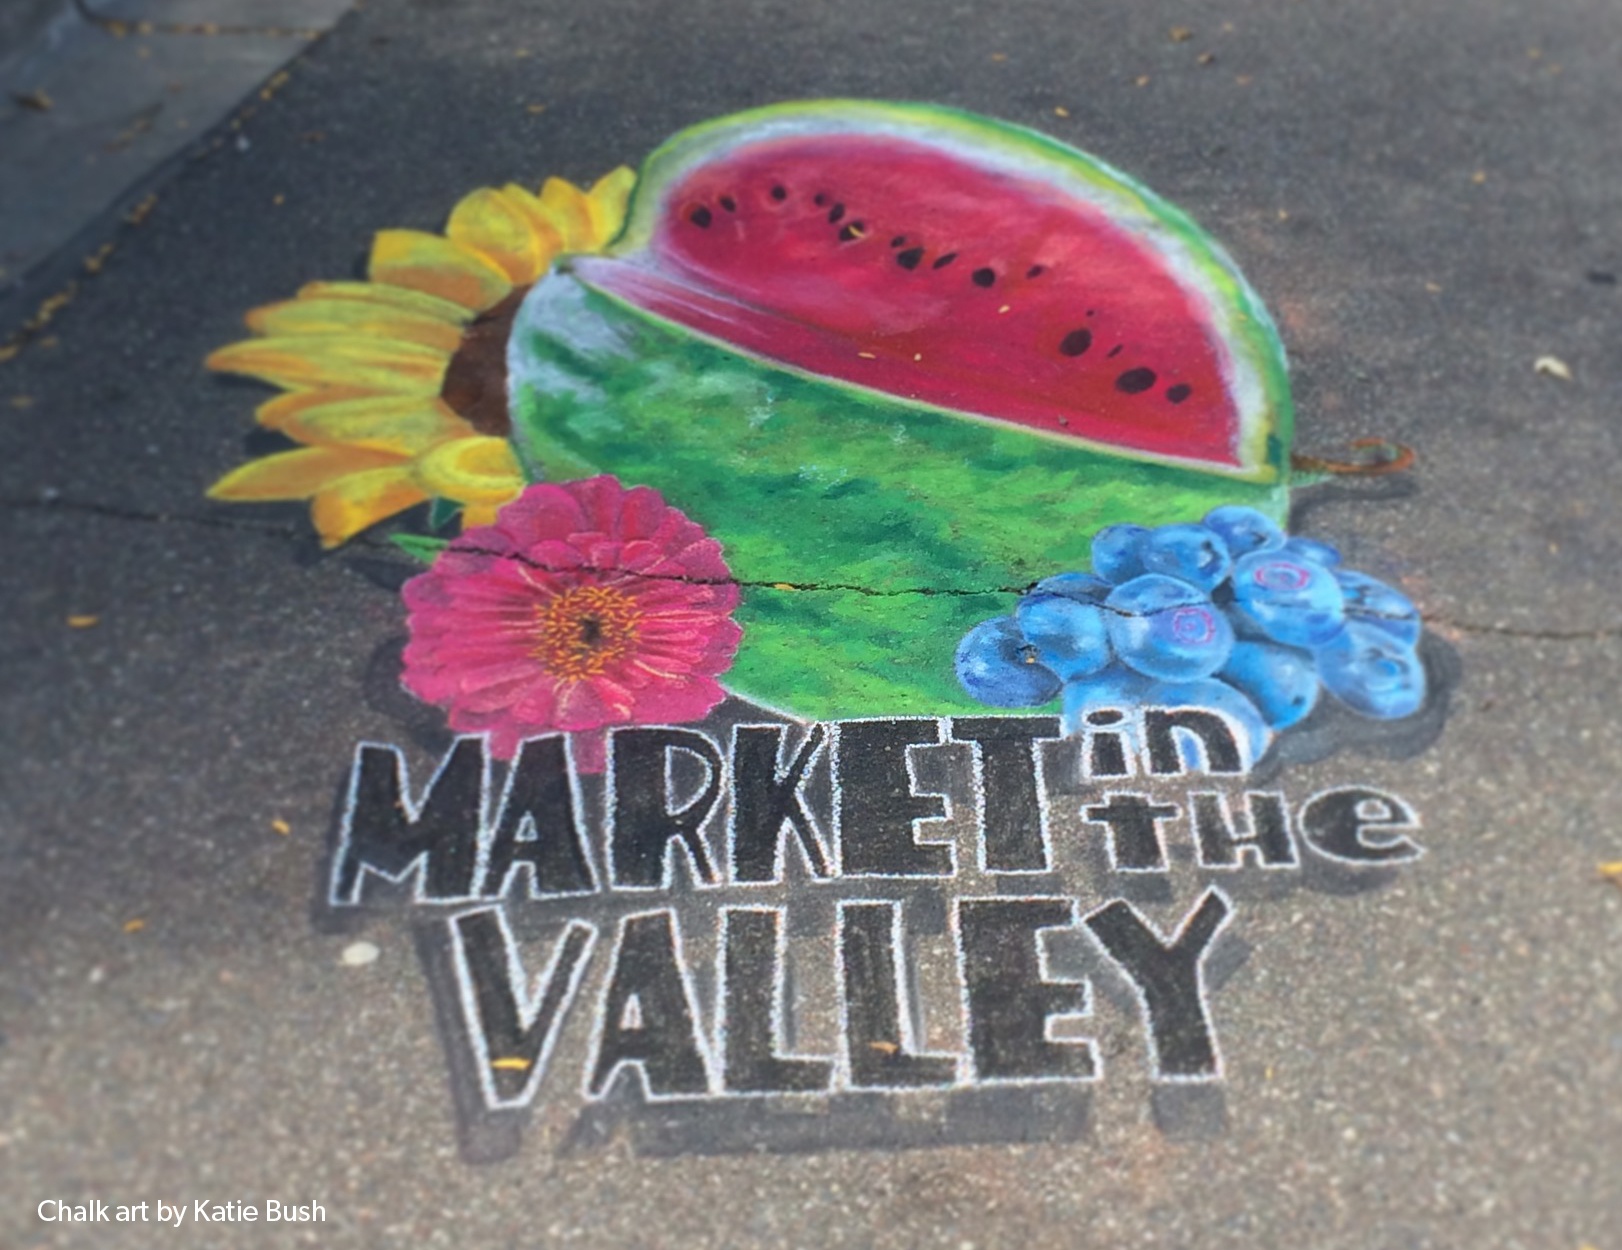 Chalk art picture of Market in the Valley by Katie Bush